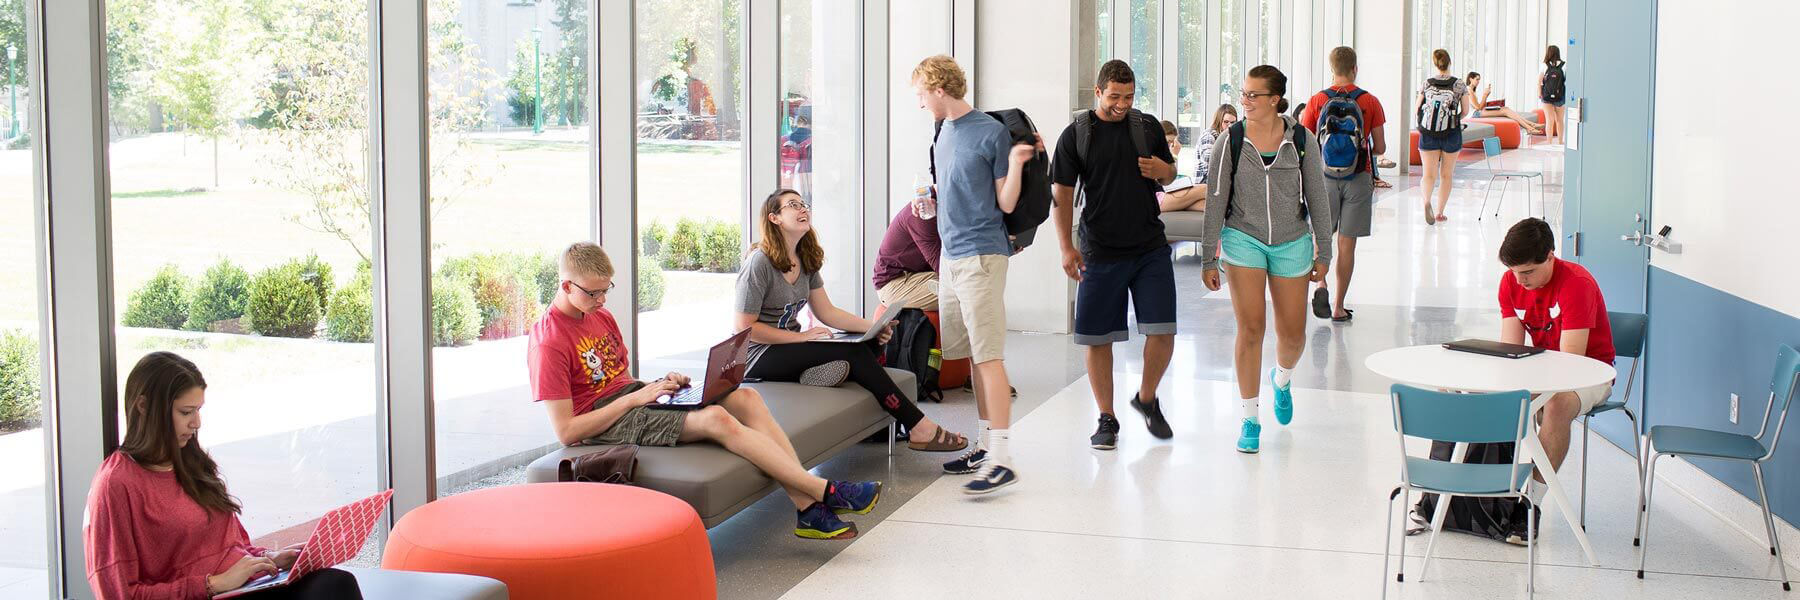 Groups of students studying on benches and chairs while other students are walking through the hallway